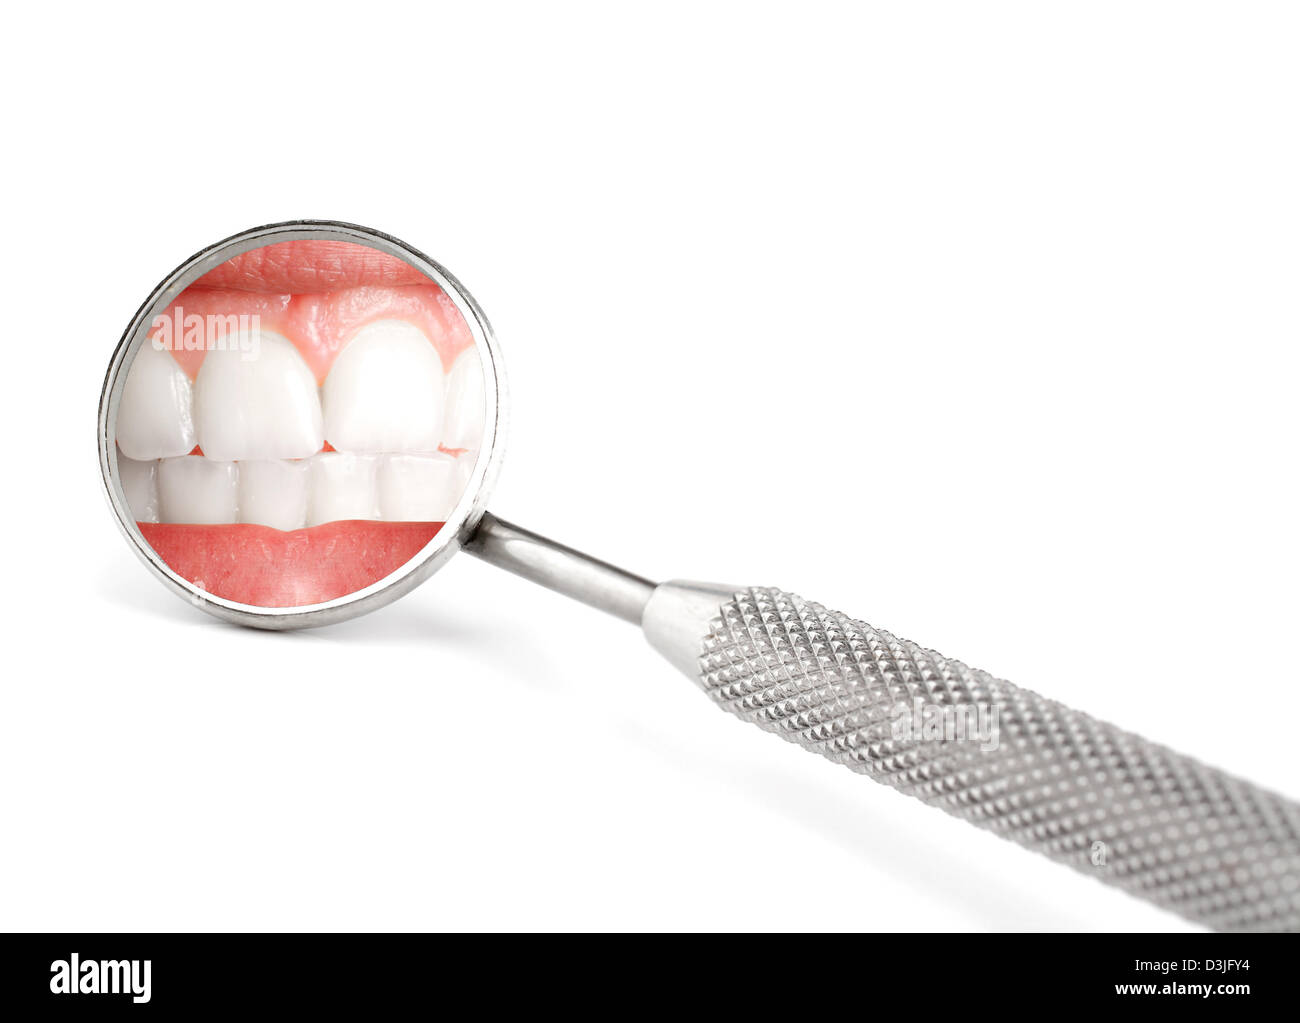 Dentist mirror with reflection of teeth Stock Photo